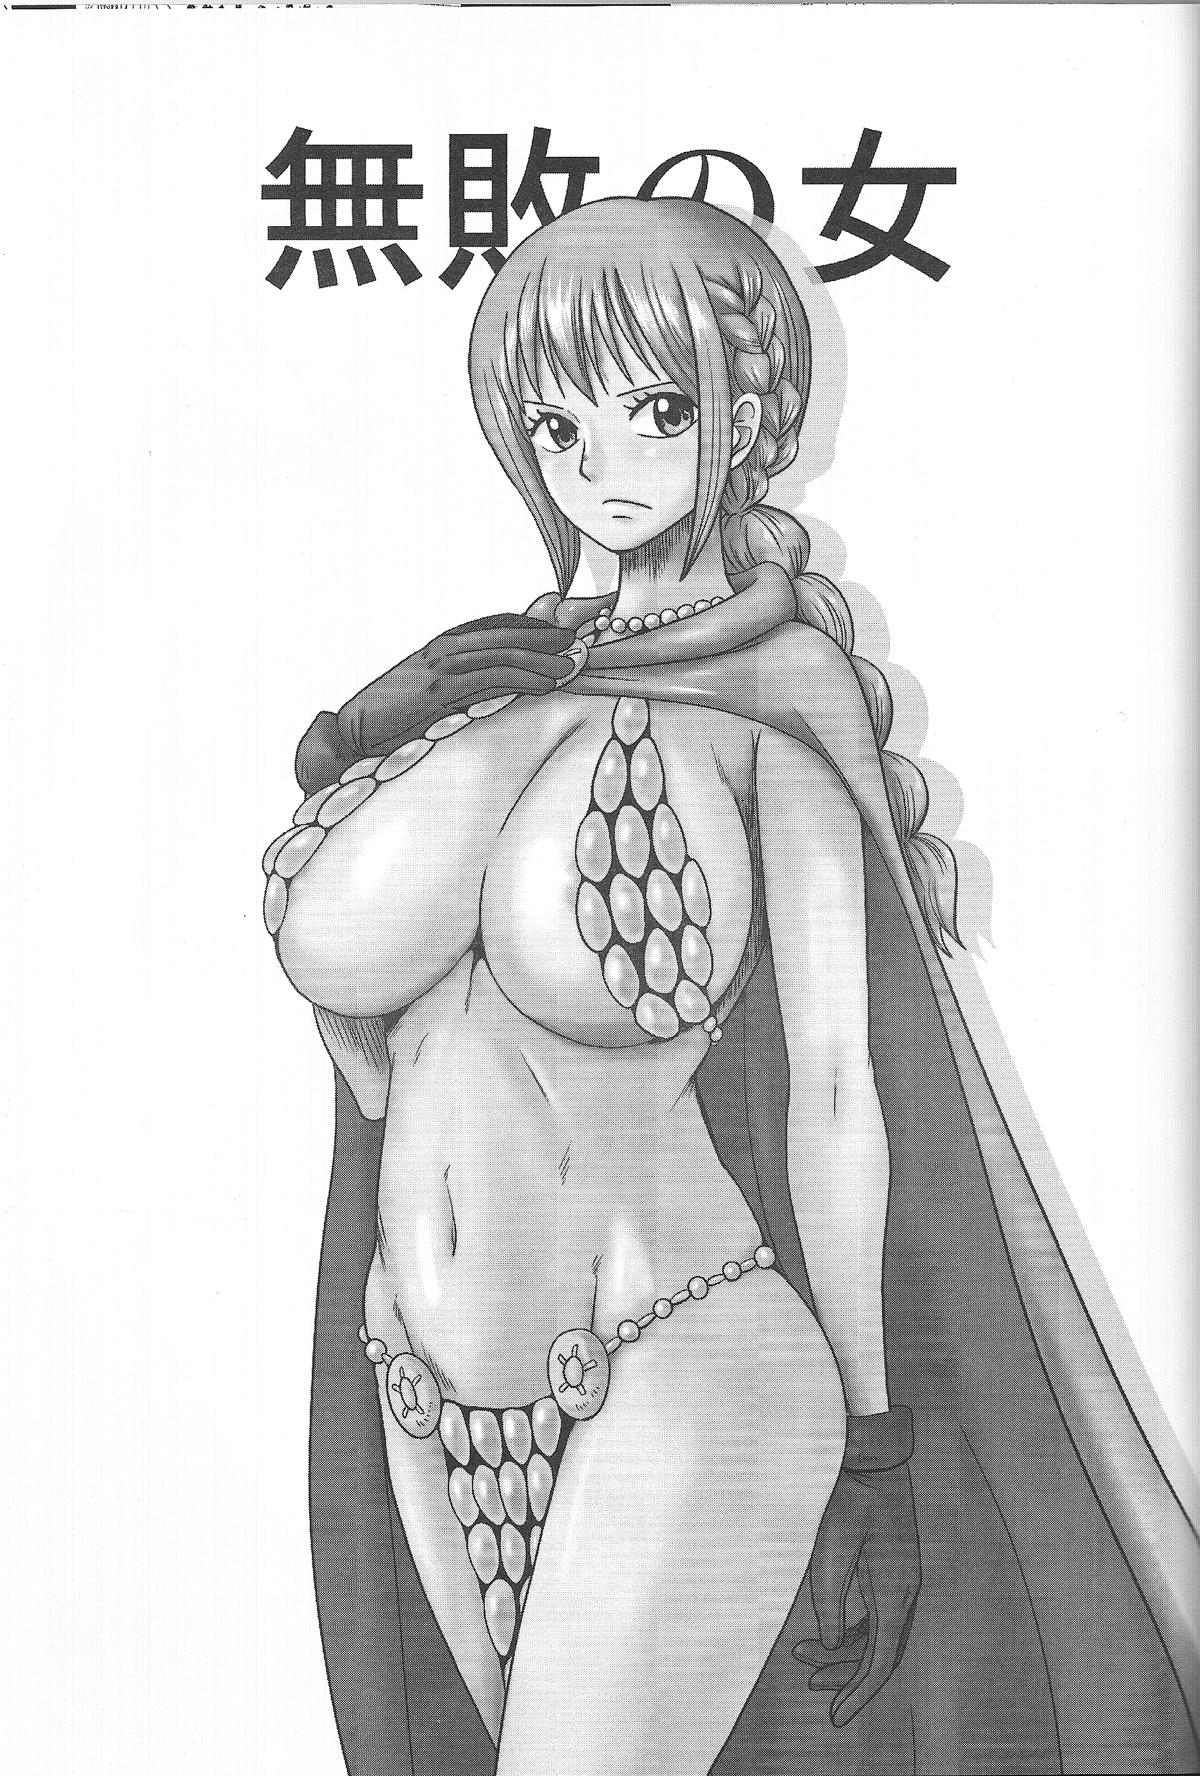 Topless Muhai no Onna - One piece Ride - Page 2